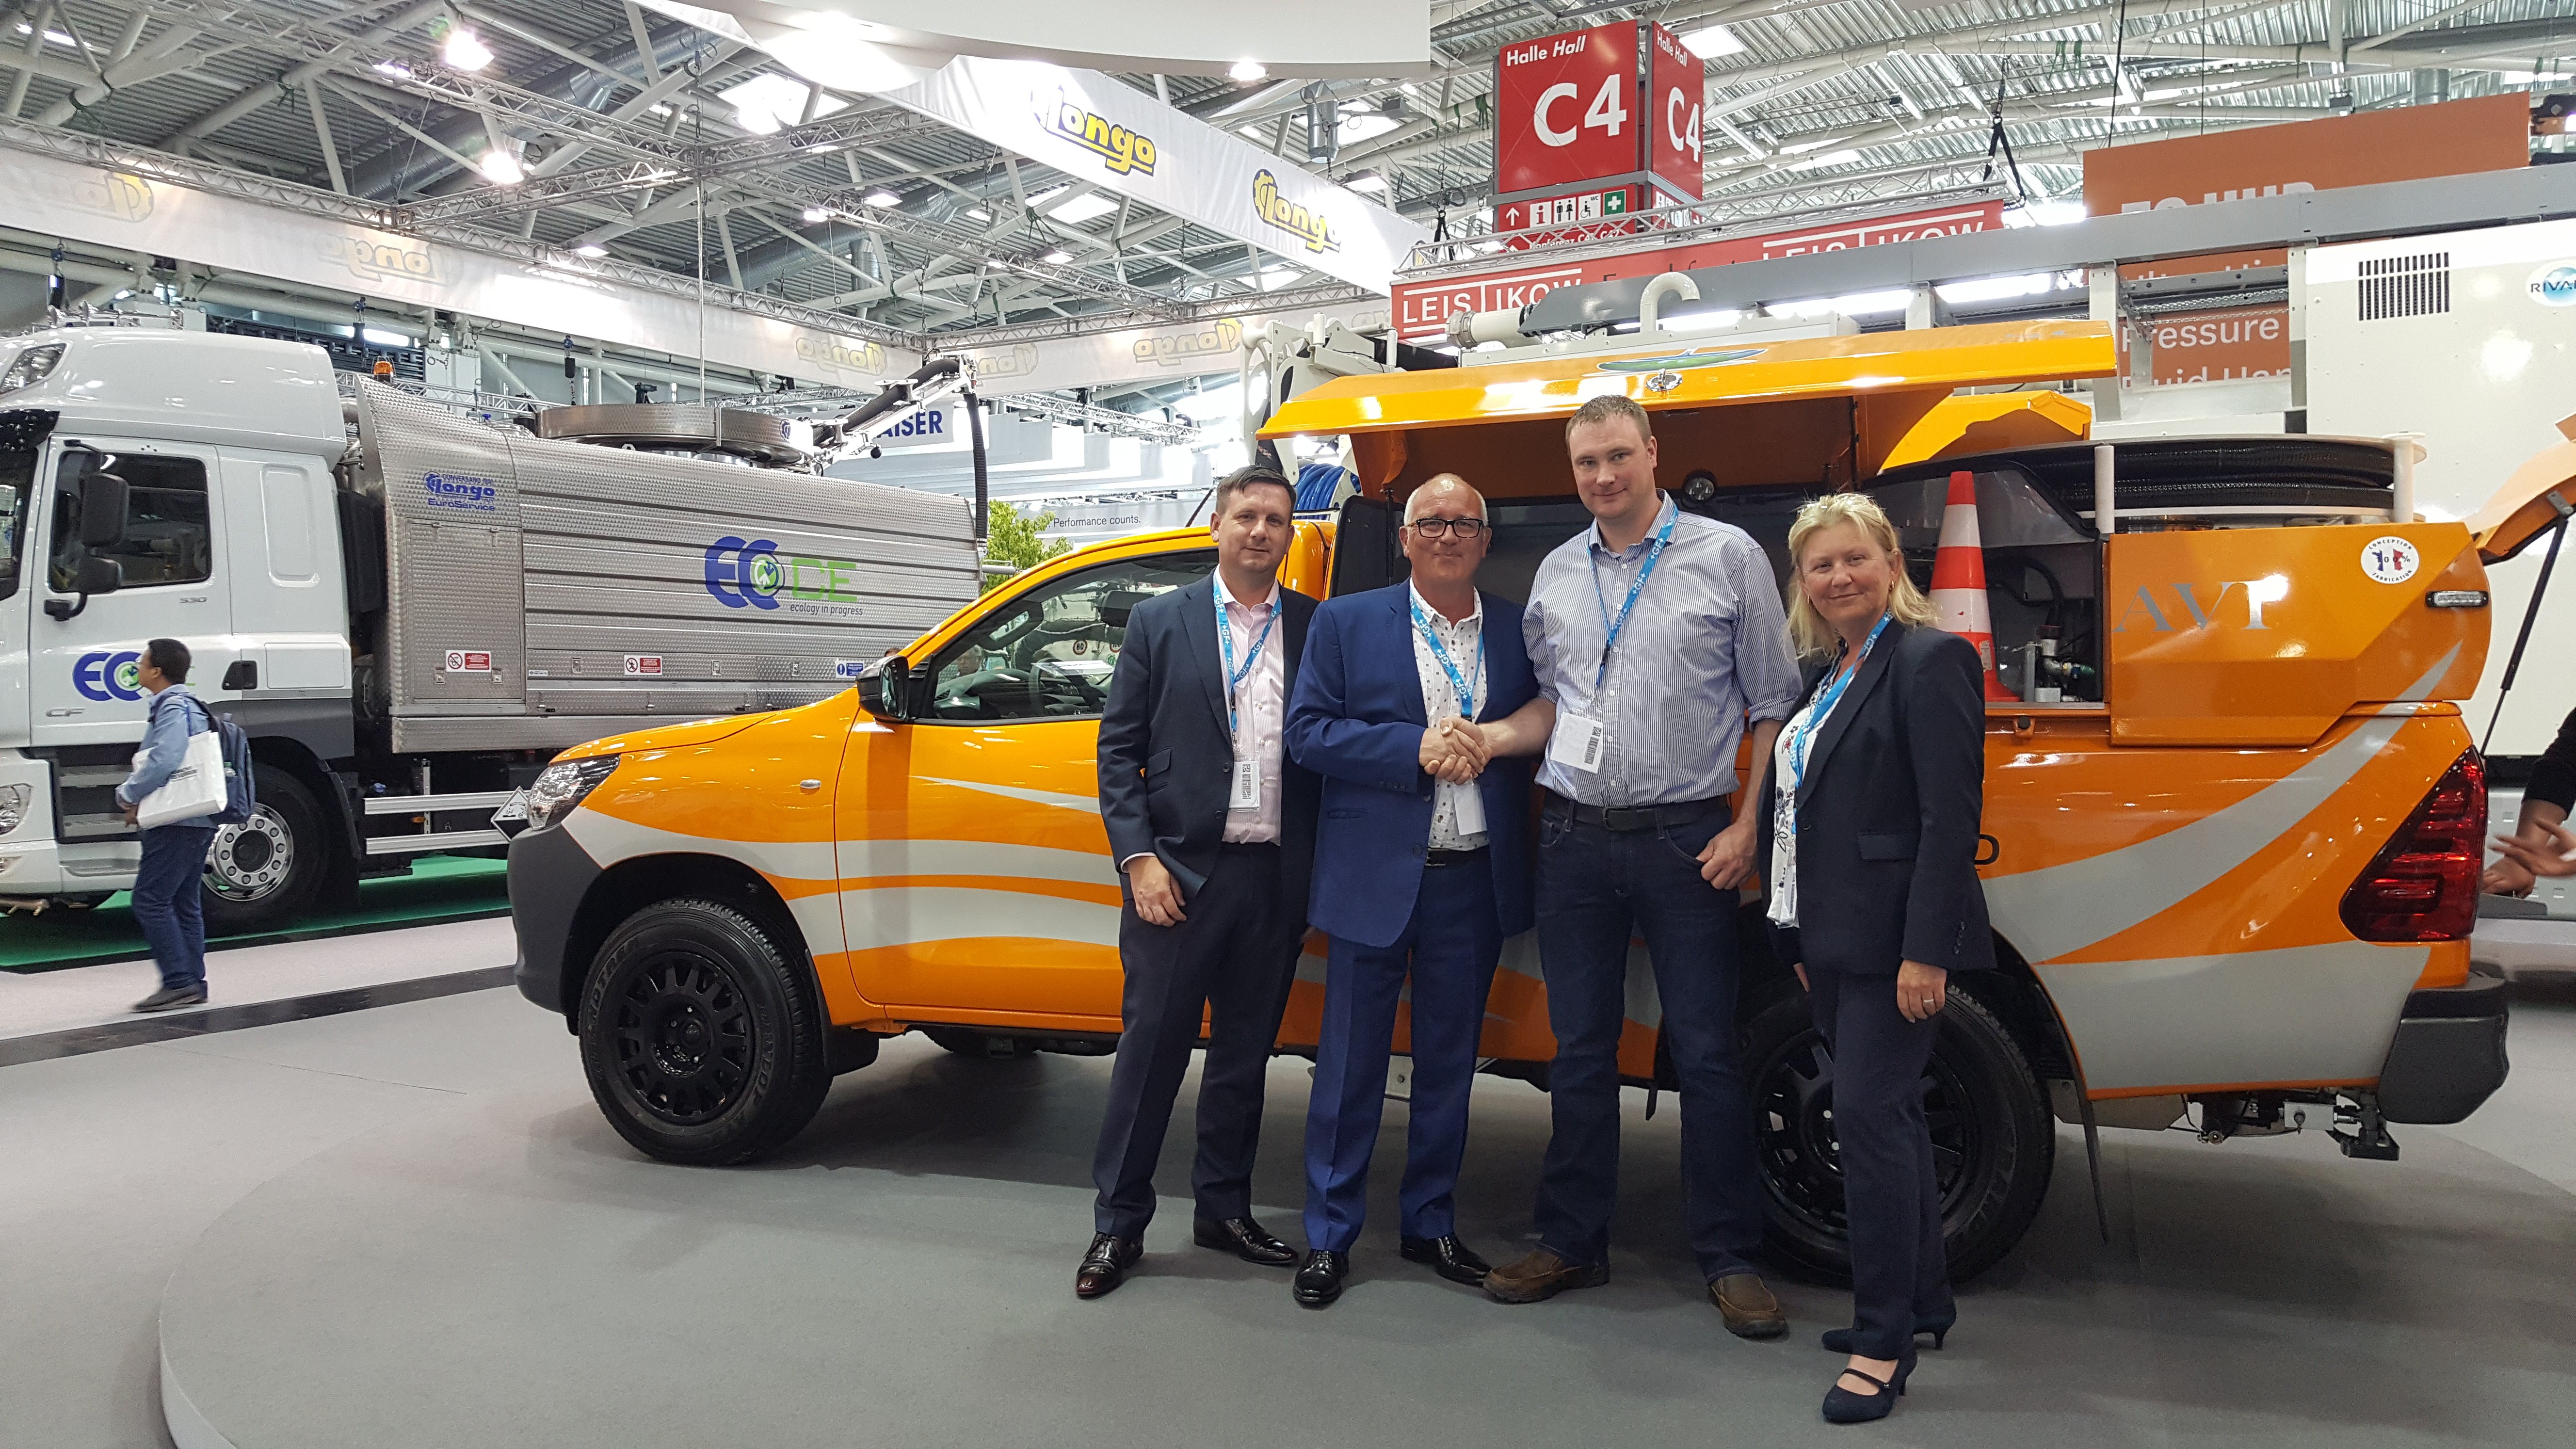 Celebrating CountyClean Group’s innovative equipment investment deal at iFAT on 15th May 2018 with a hearty handshake in front of Rivard’s BORA combination unit showpiece. From left: CountyClean Group Trevor Beer, Operations Director and Mike Walker, Managing Director. O'C Mechanical Services Damien O’Connor, Director. CountyClean Group Debbie Walker, Director & Company Secretary. (Foto: CountyClean Group)